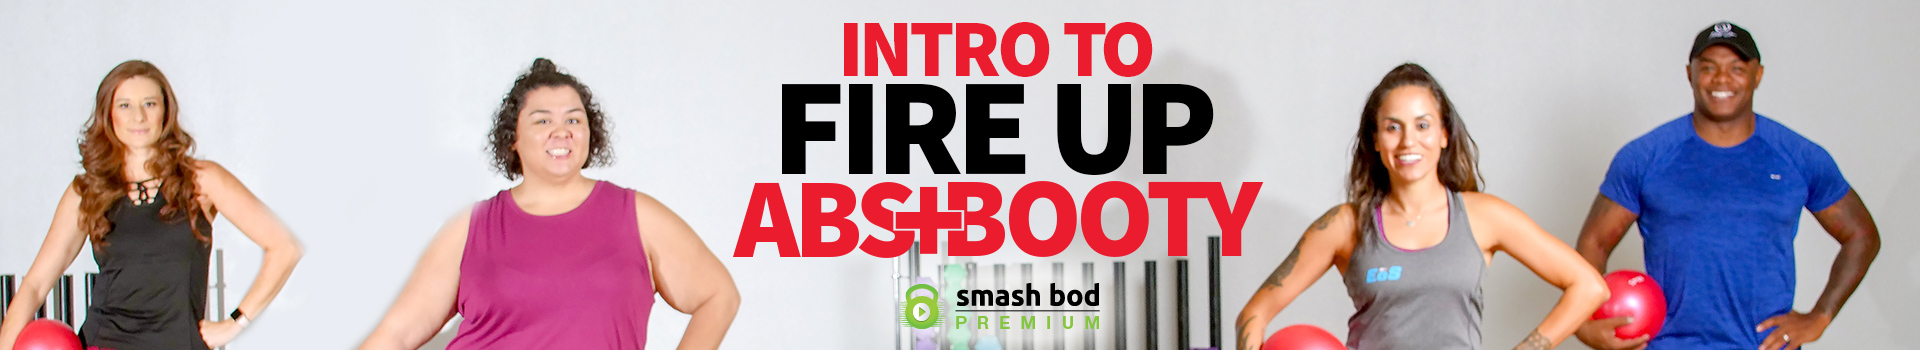 Intro to Fire Up Abs + Booty 